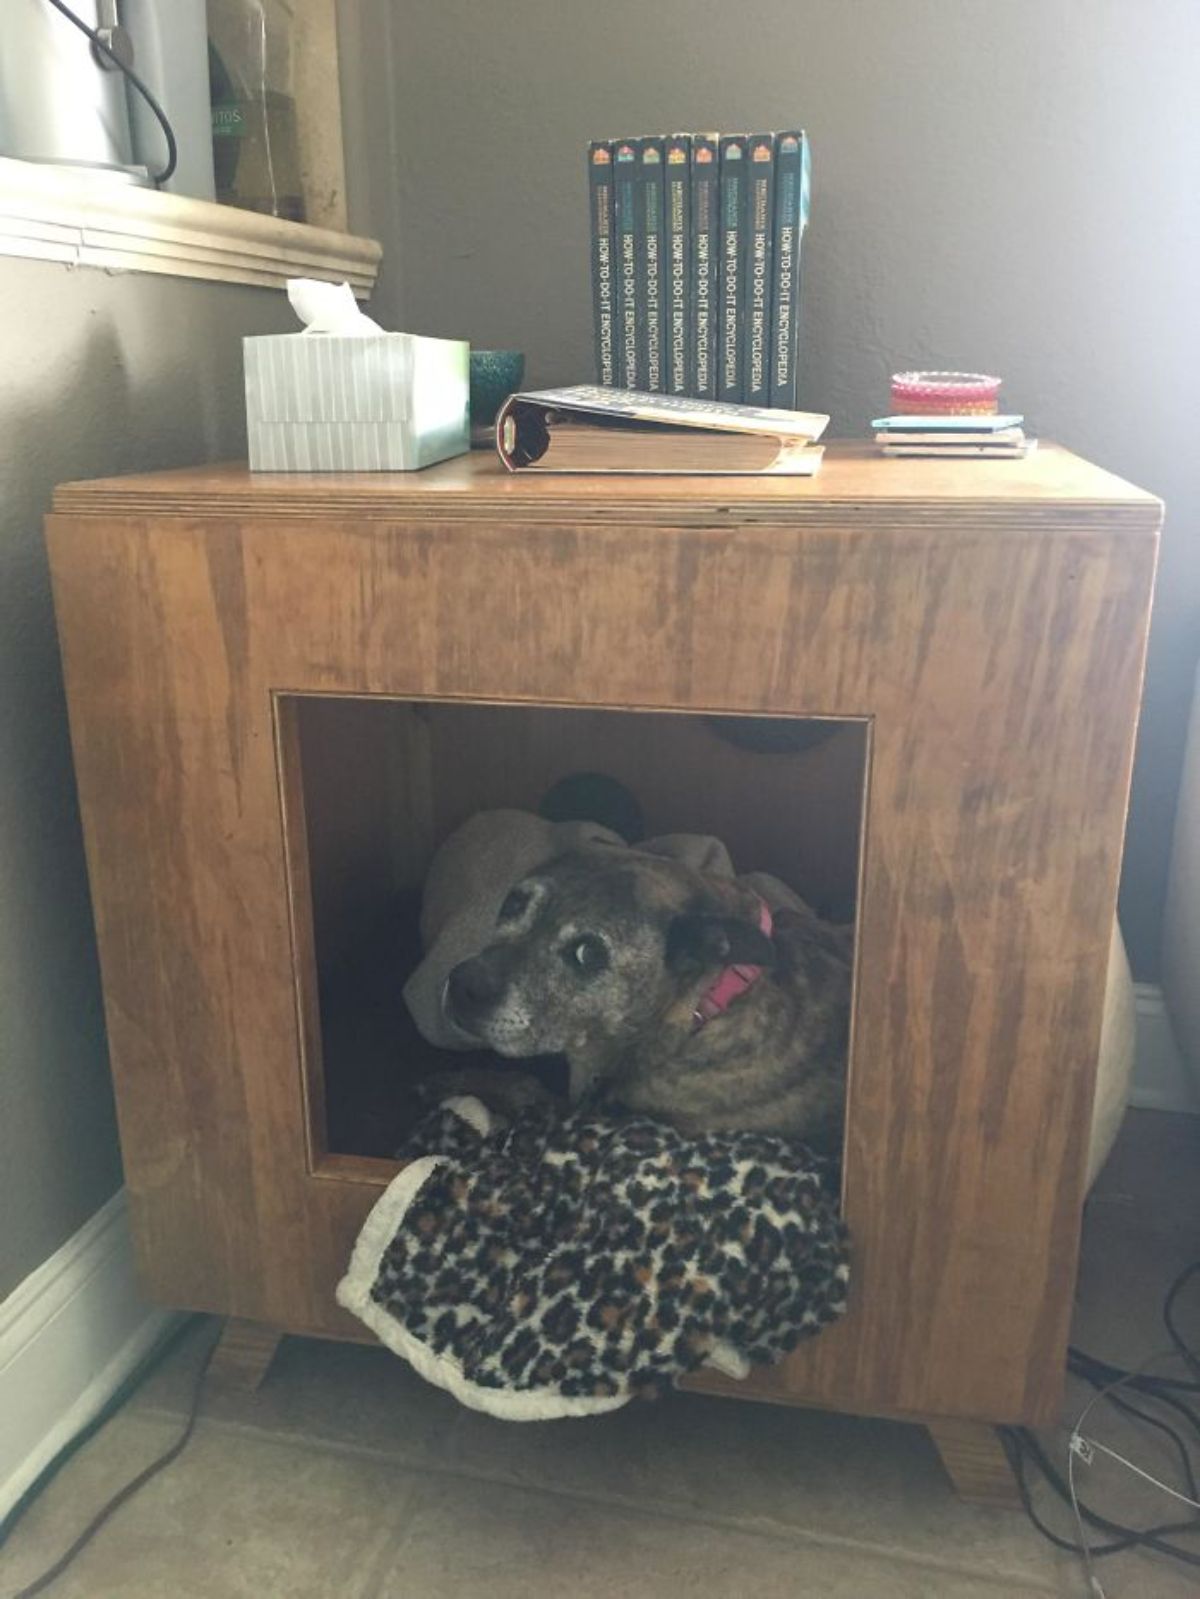 black and brown brindle dog laying on blankets inside a cave made into a wooden end table